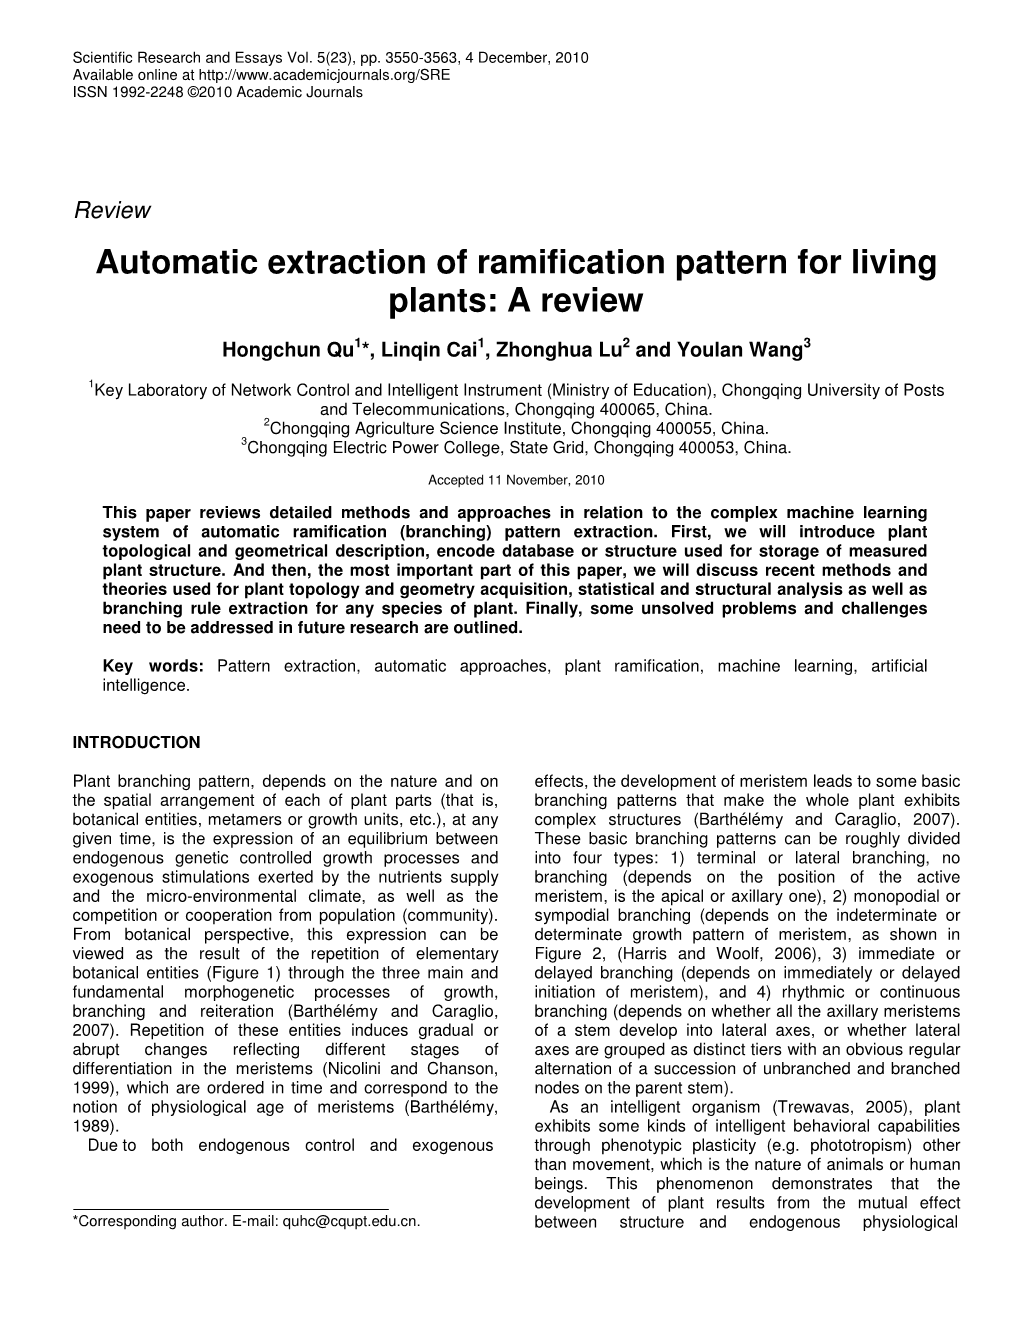 Automatic Extraction of Ramification Pattern for Living Plants: a Review